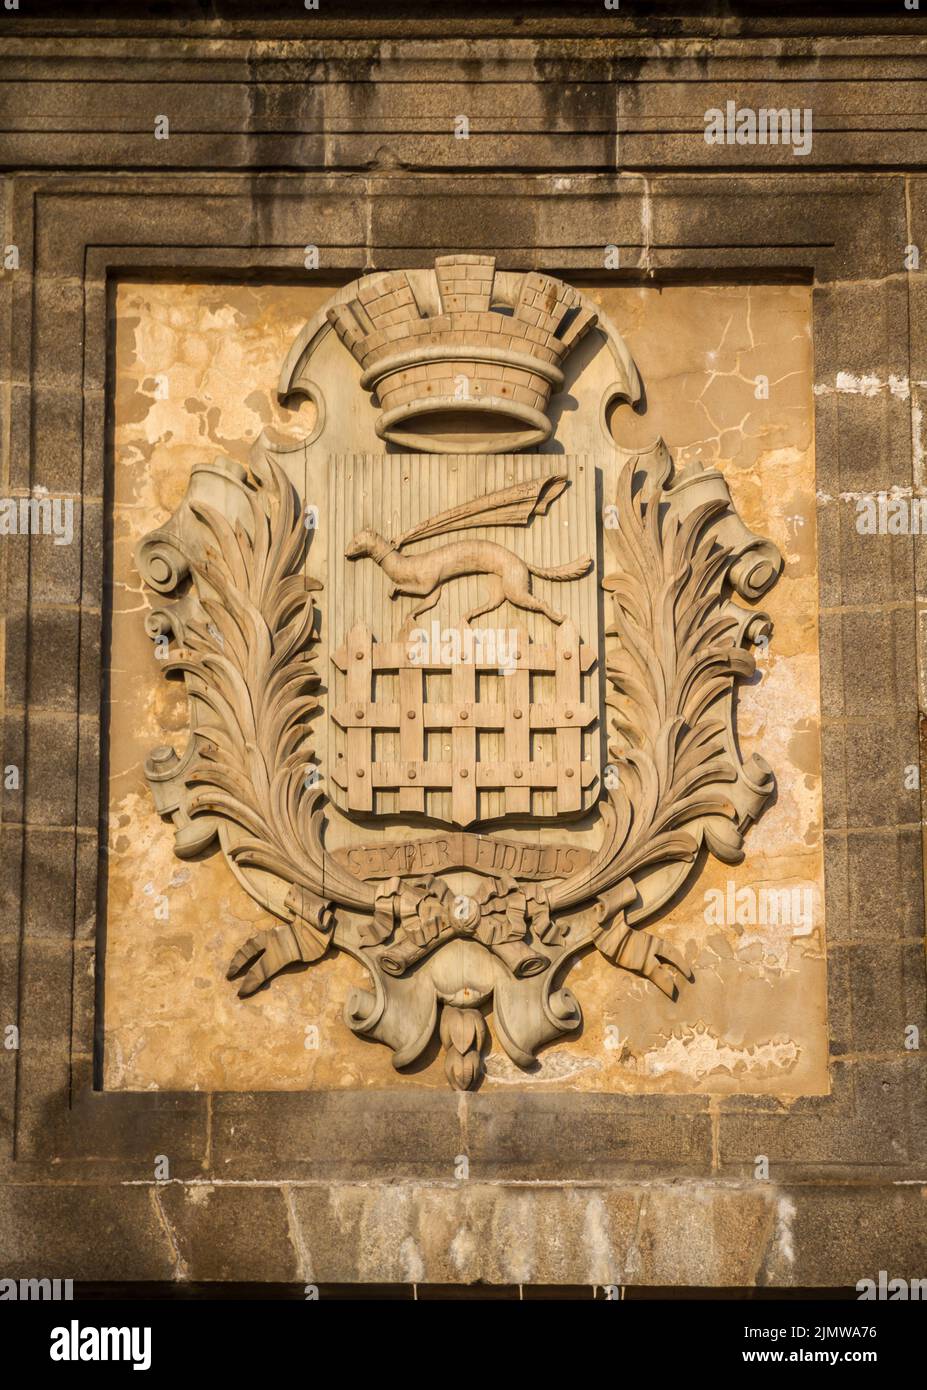 Saint-Malo city coat of arms on a wall, Brittany, France Stock Photo